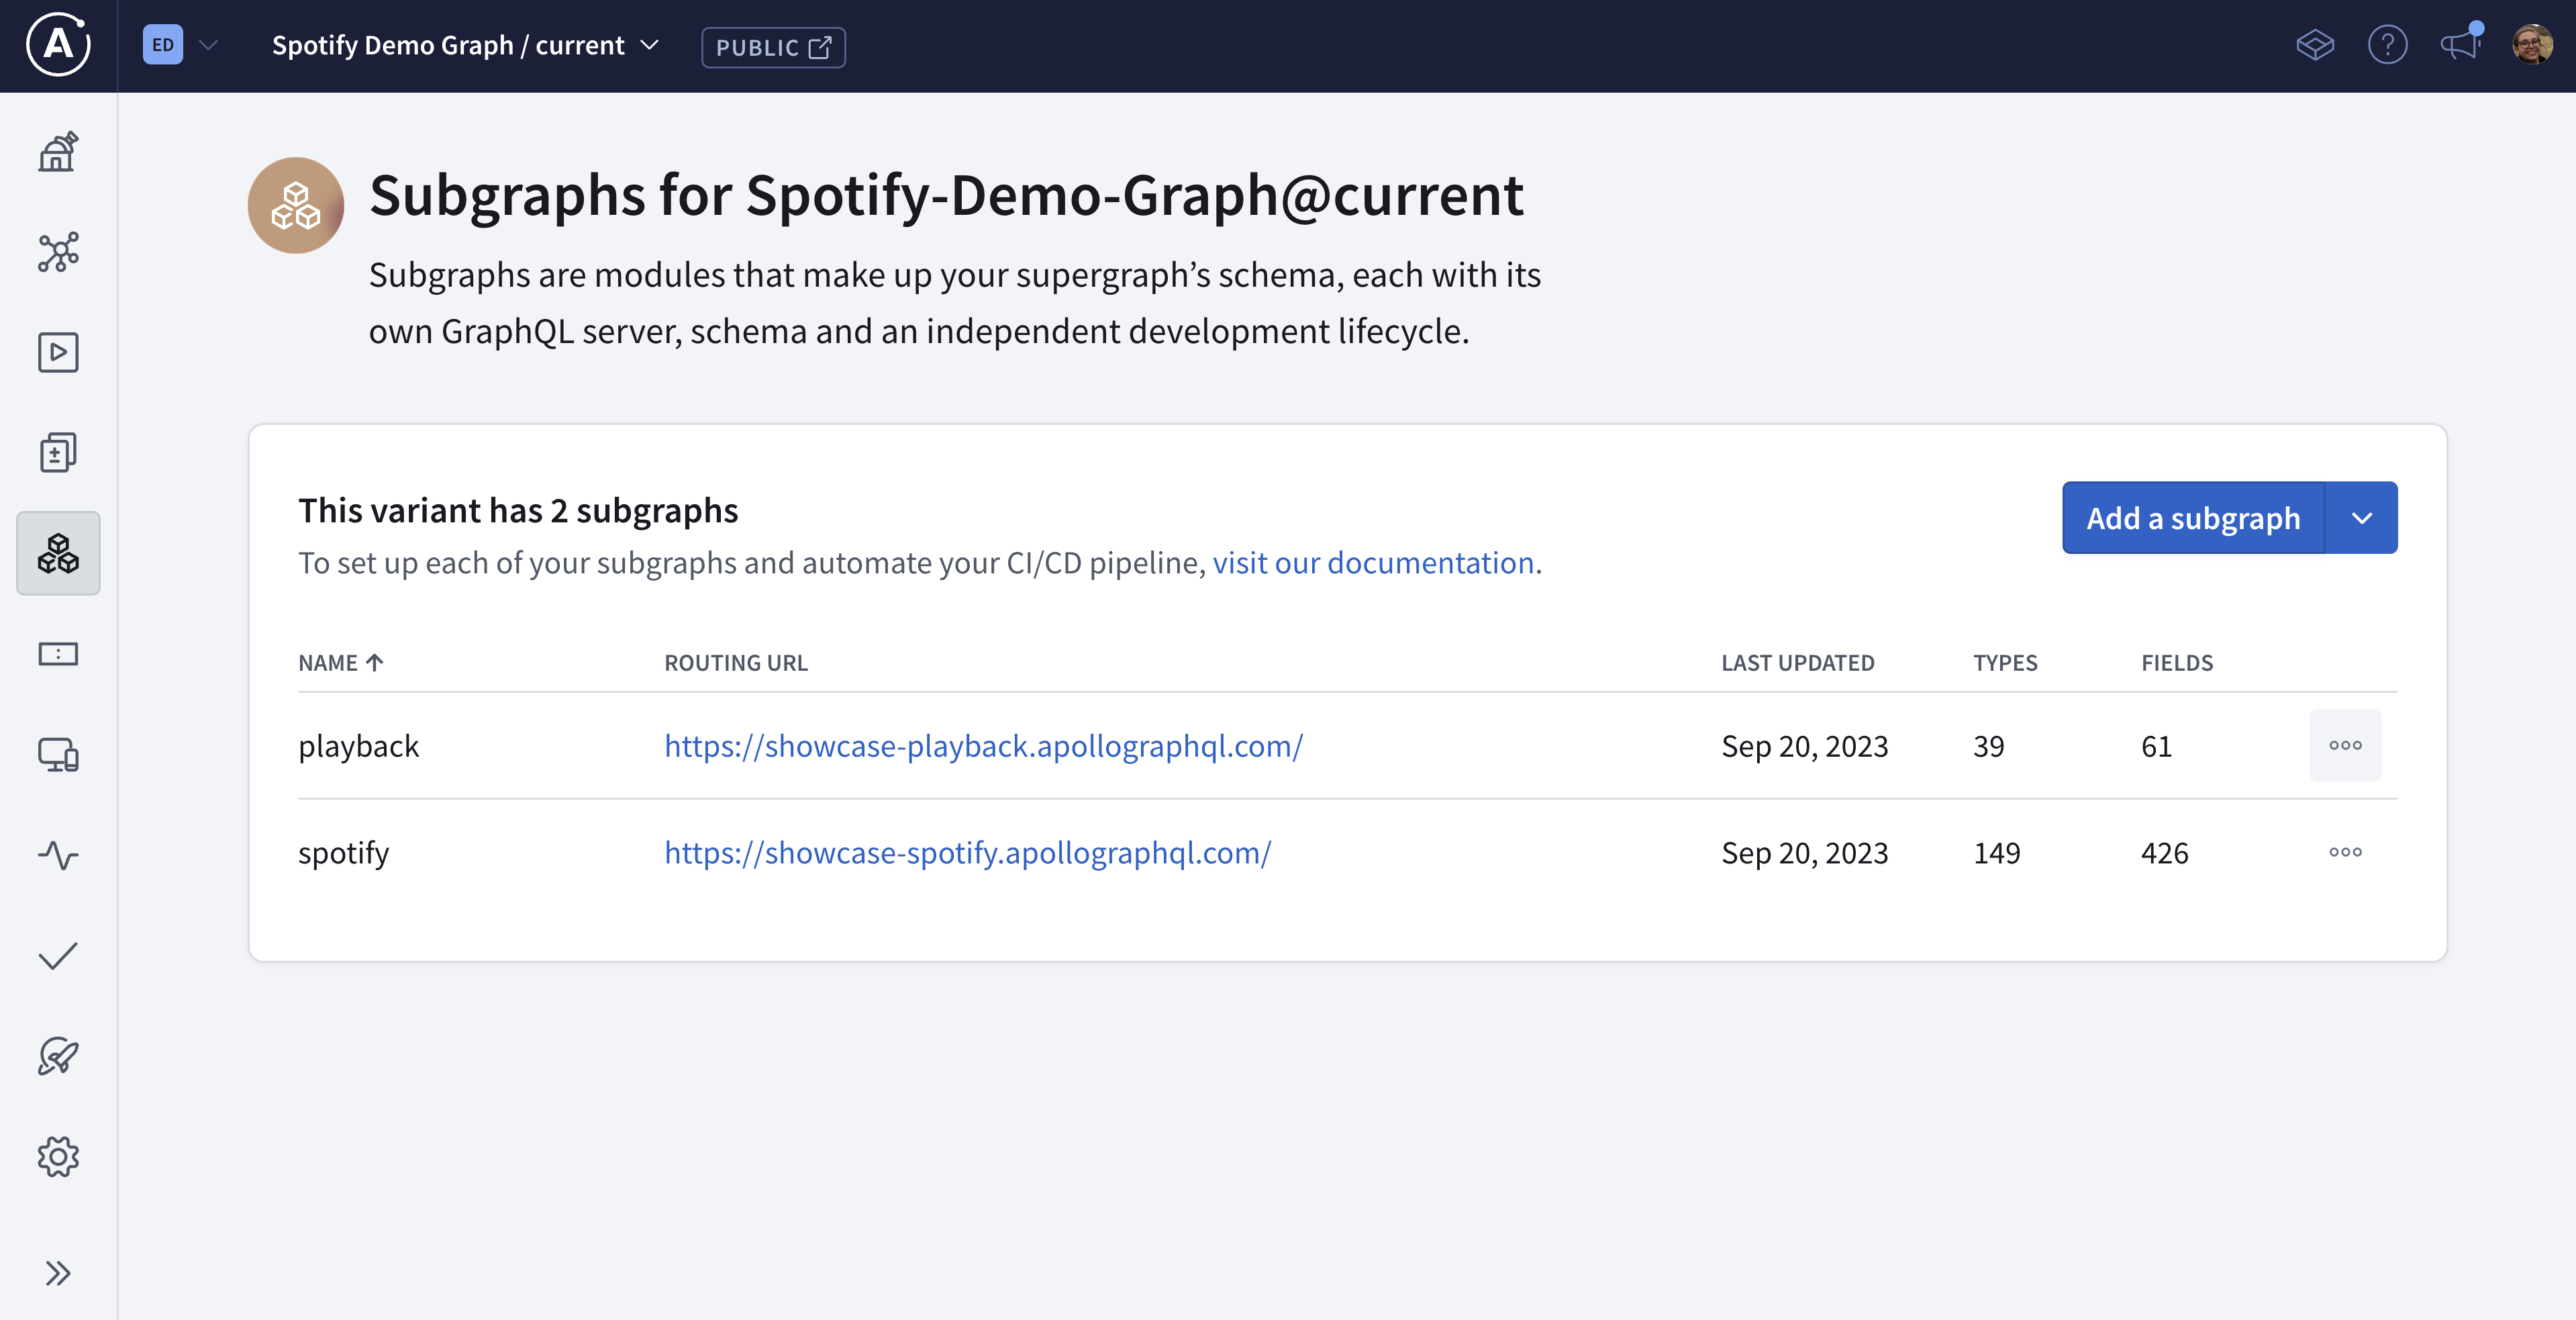 The GraphOS Studio Subgraphs page, showing two subgraphs: playback and spotify.